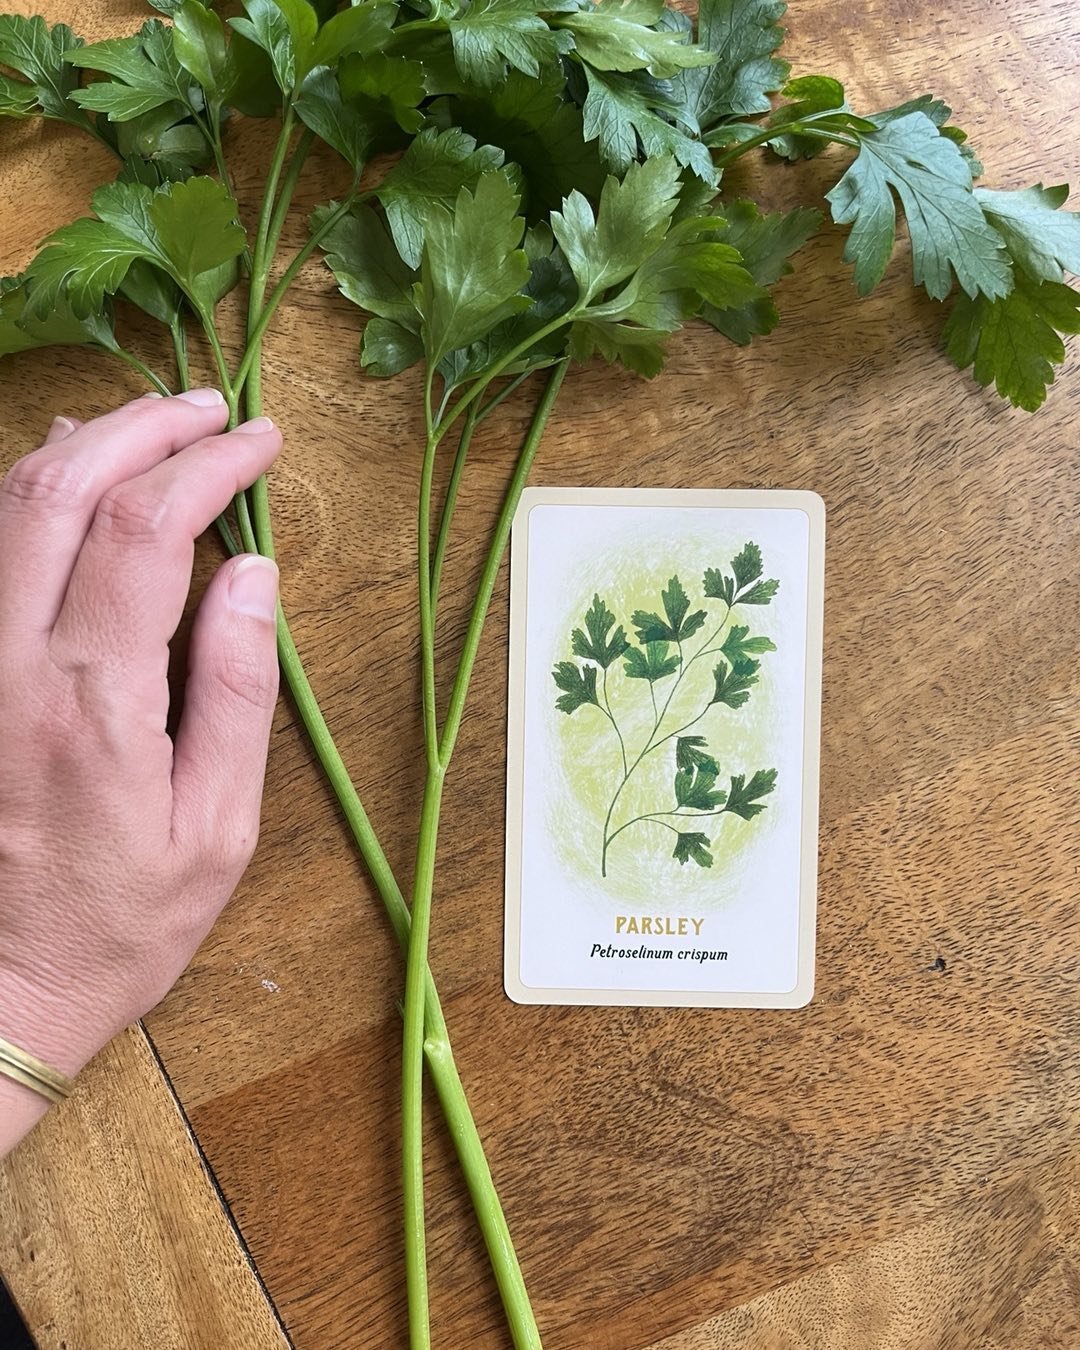 Parsley is for: protection, to boost intelligence and creativity, as well as clarity of thought. To work with it, simply add it to your everyday cooking, perhaps whispering your intentions as you do so. #magicrituals #witchlife #ritualsandspells